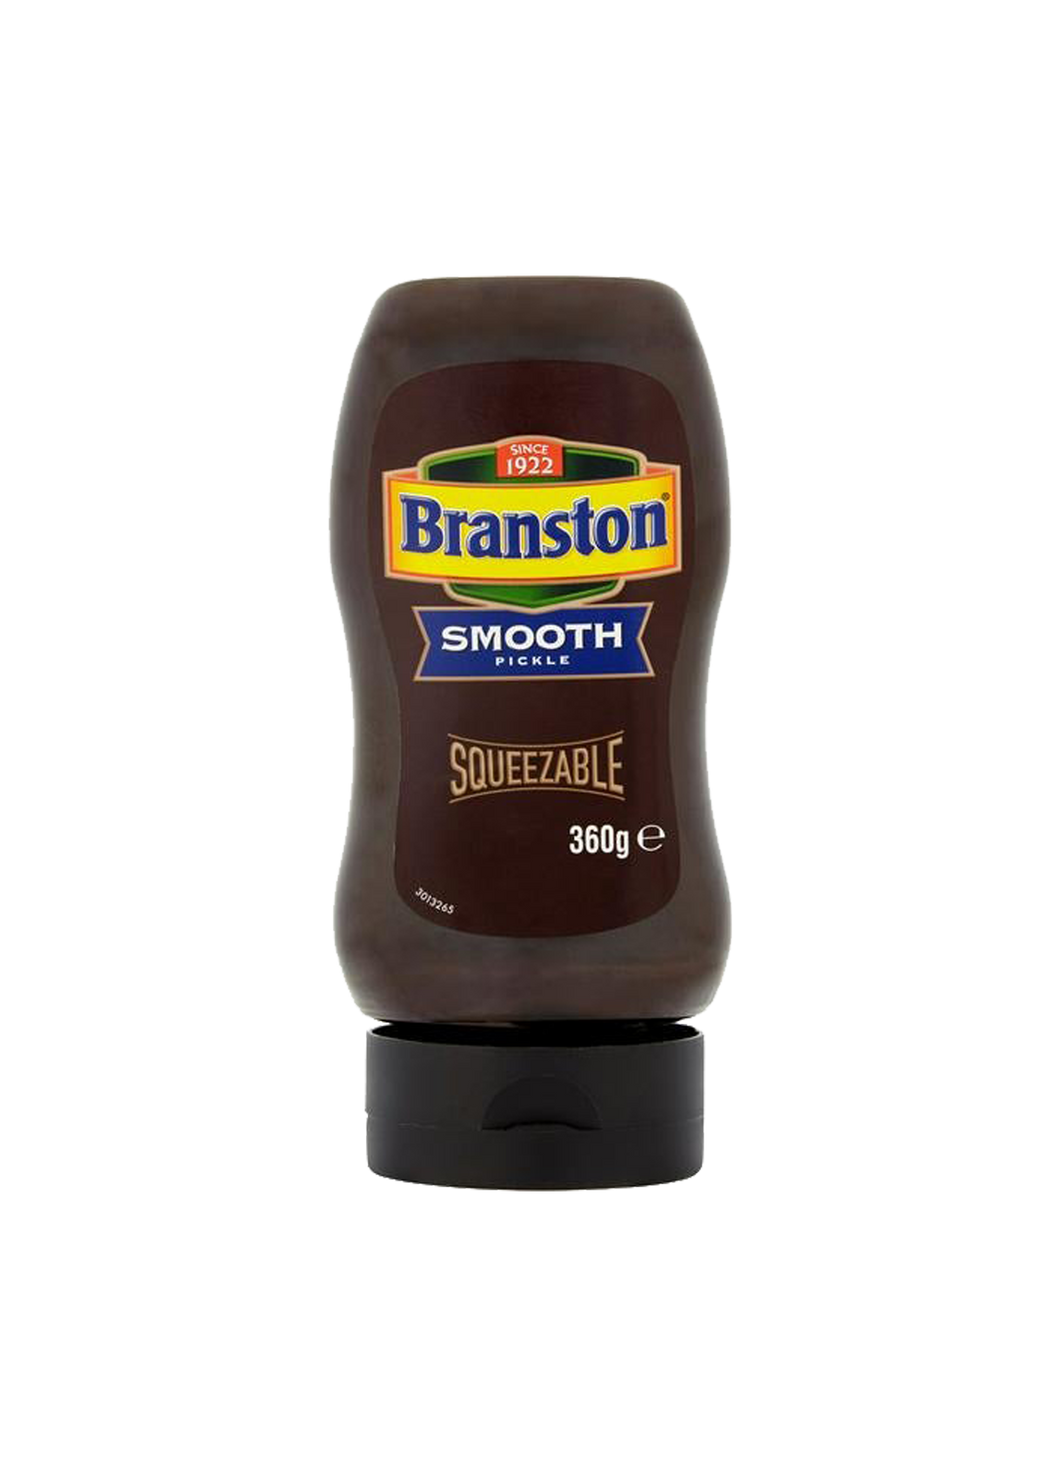 Branston Smooth Pickle Squeezable 355g